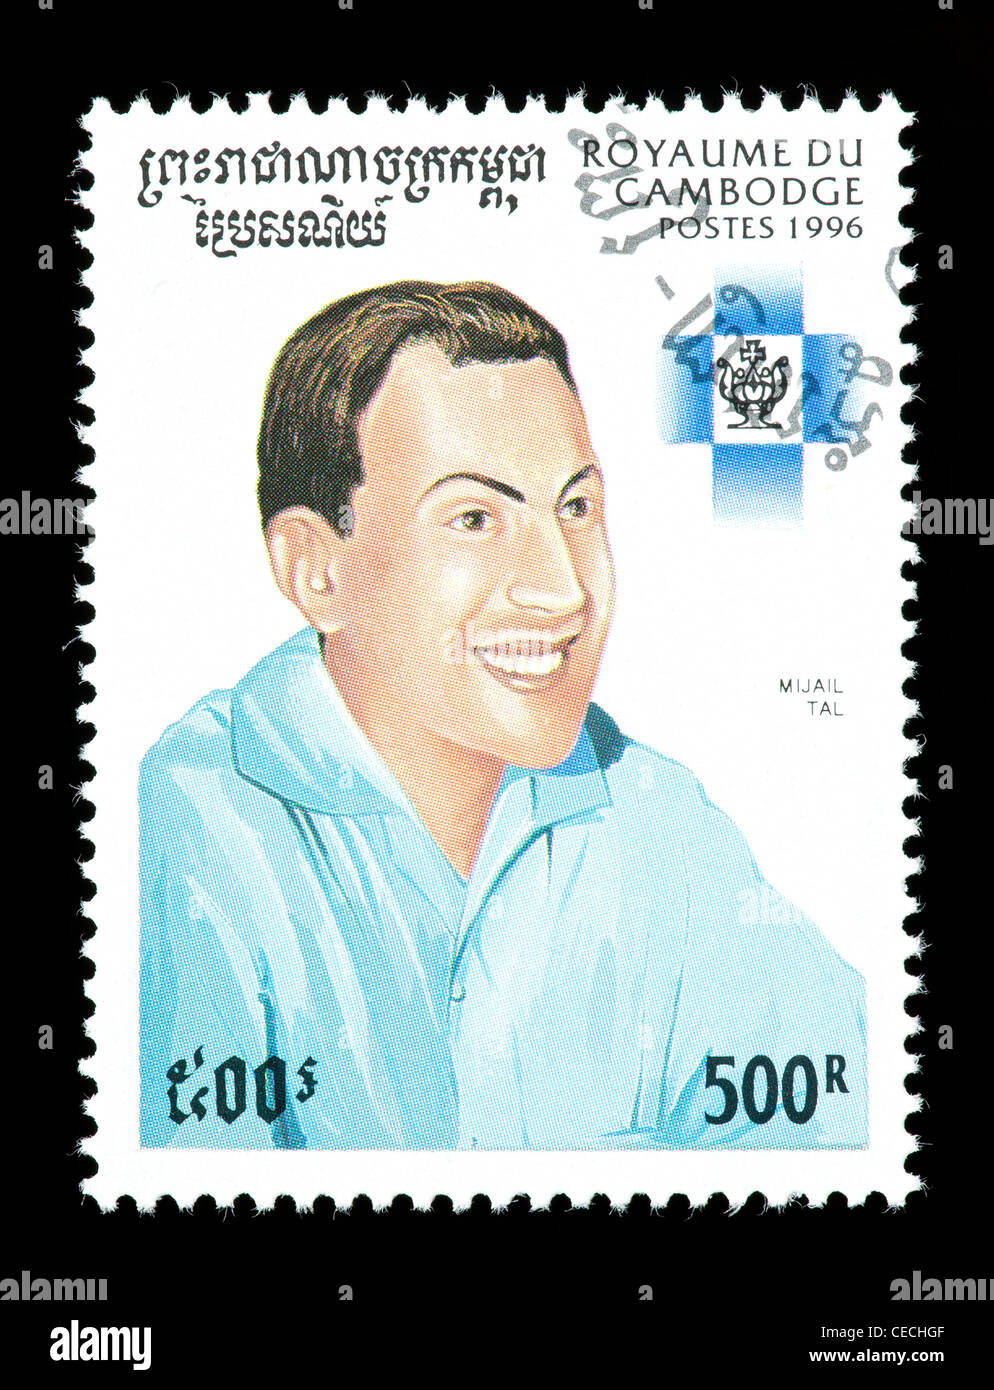  Central Africa - 2022 Chess Champ Mikhail Tal - 4 Stamp Sheet -  CA220442a : Toys & Games